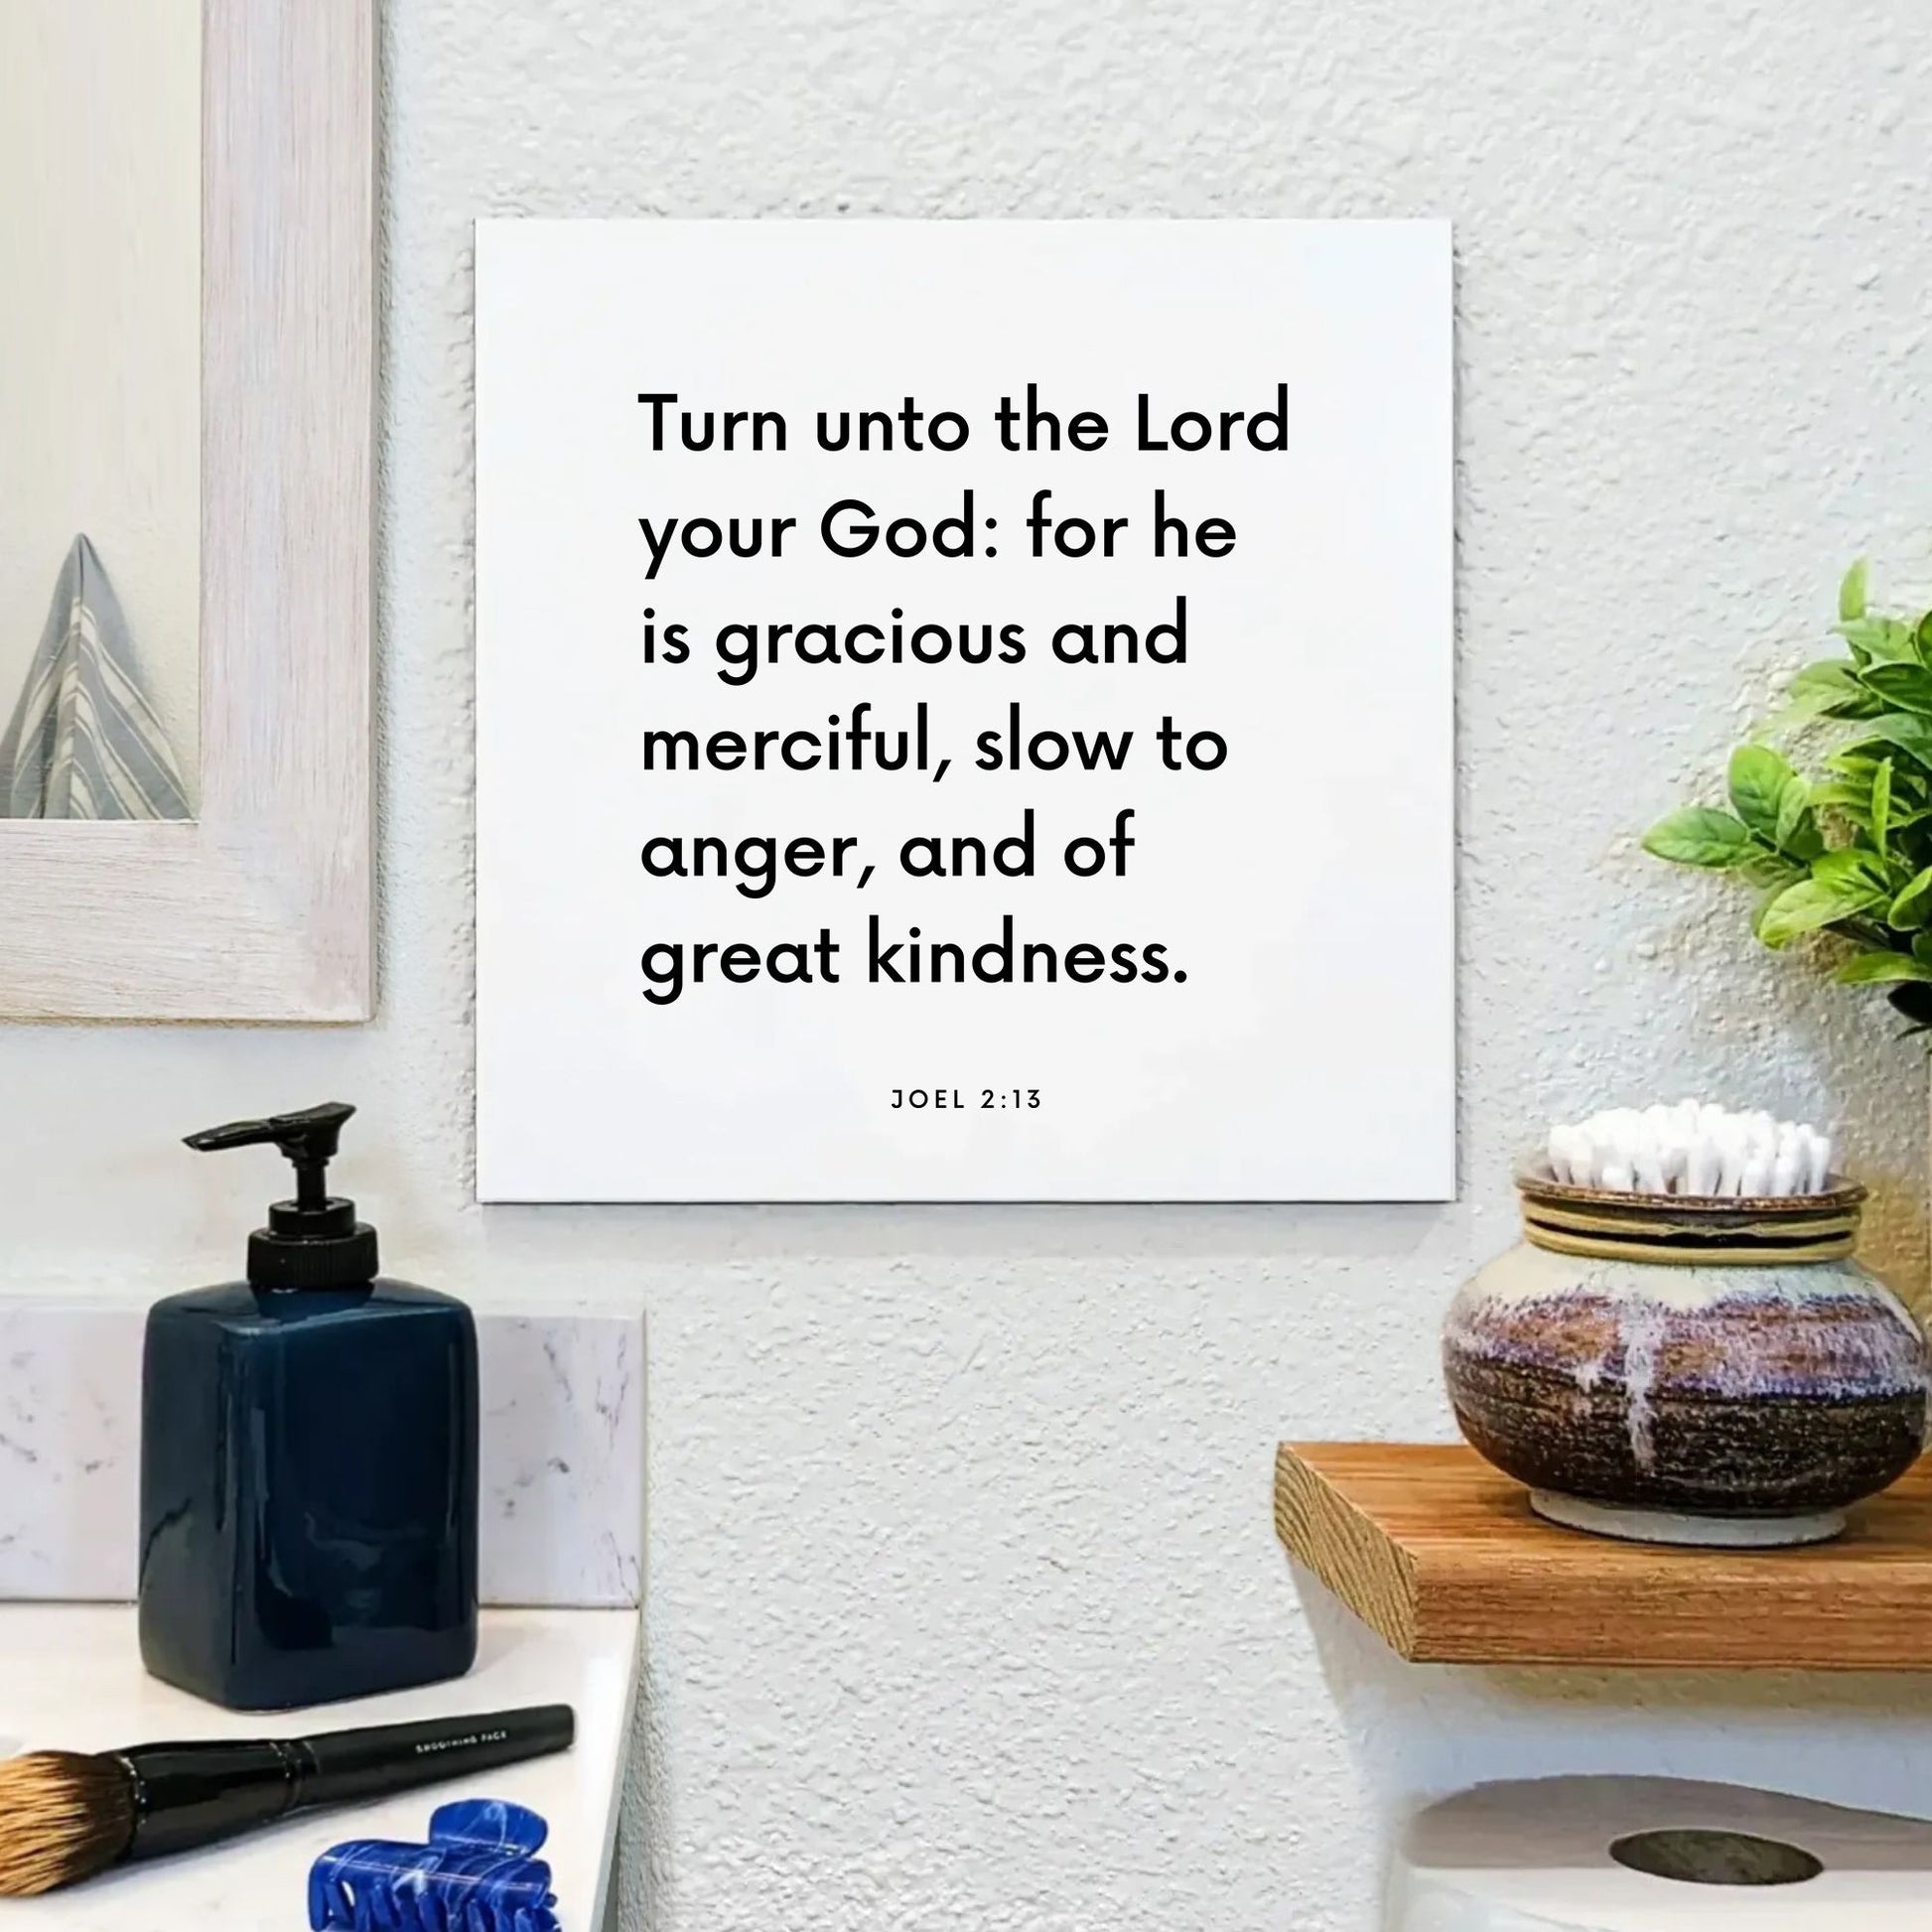 Bathroom mouting of the scripture tile for Joel 2:13 - "Turn unto the Lord your God: for he is gracious and merciful"